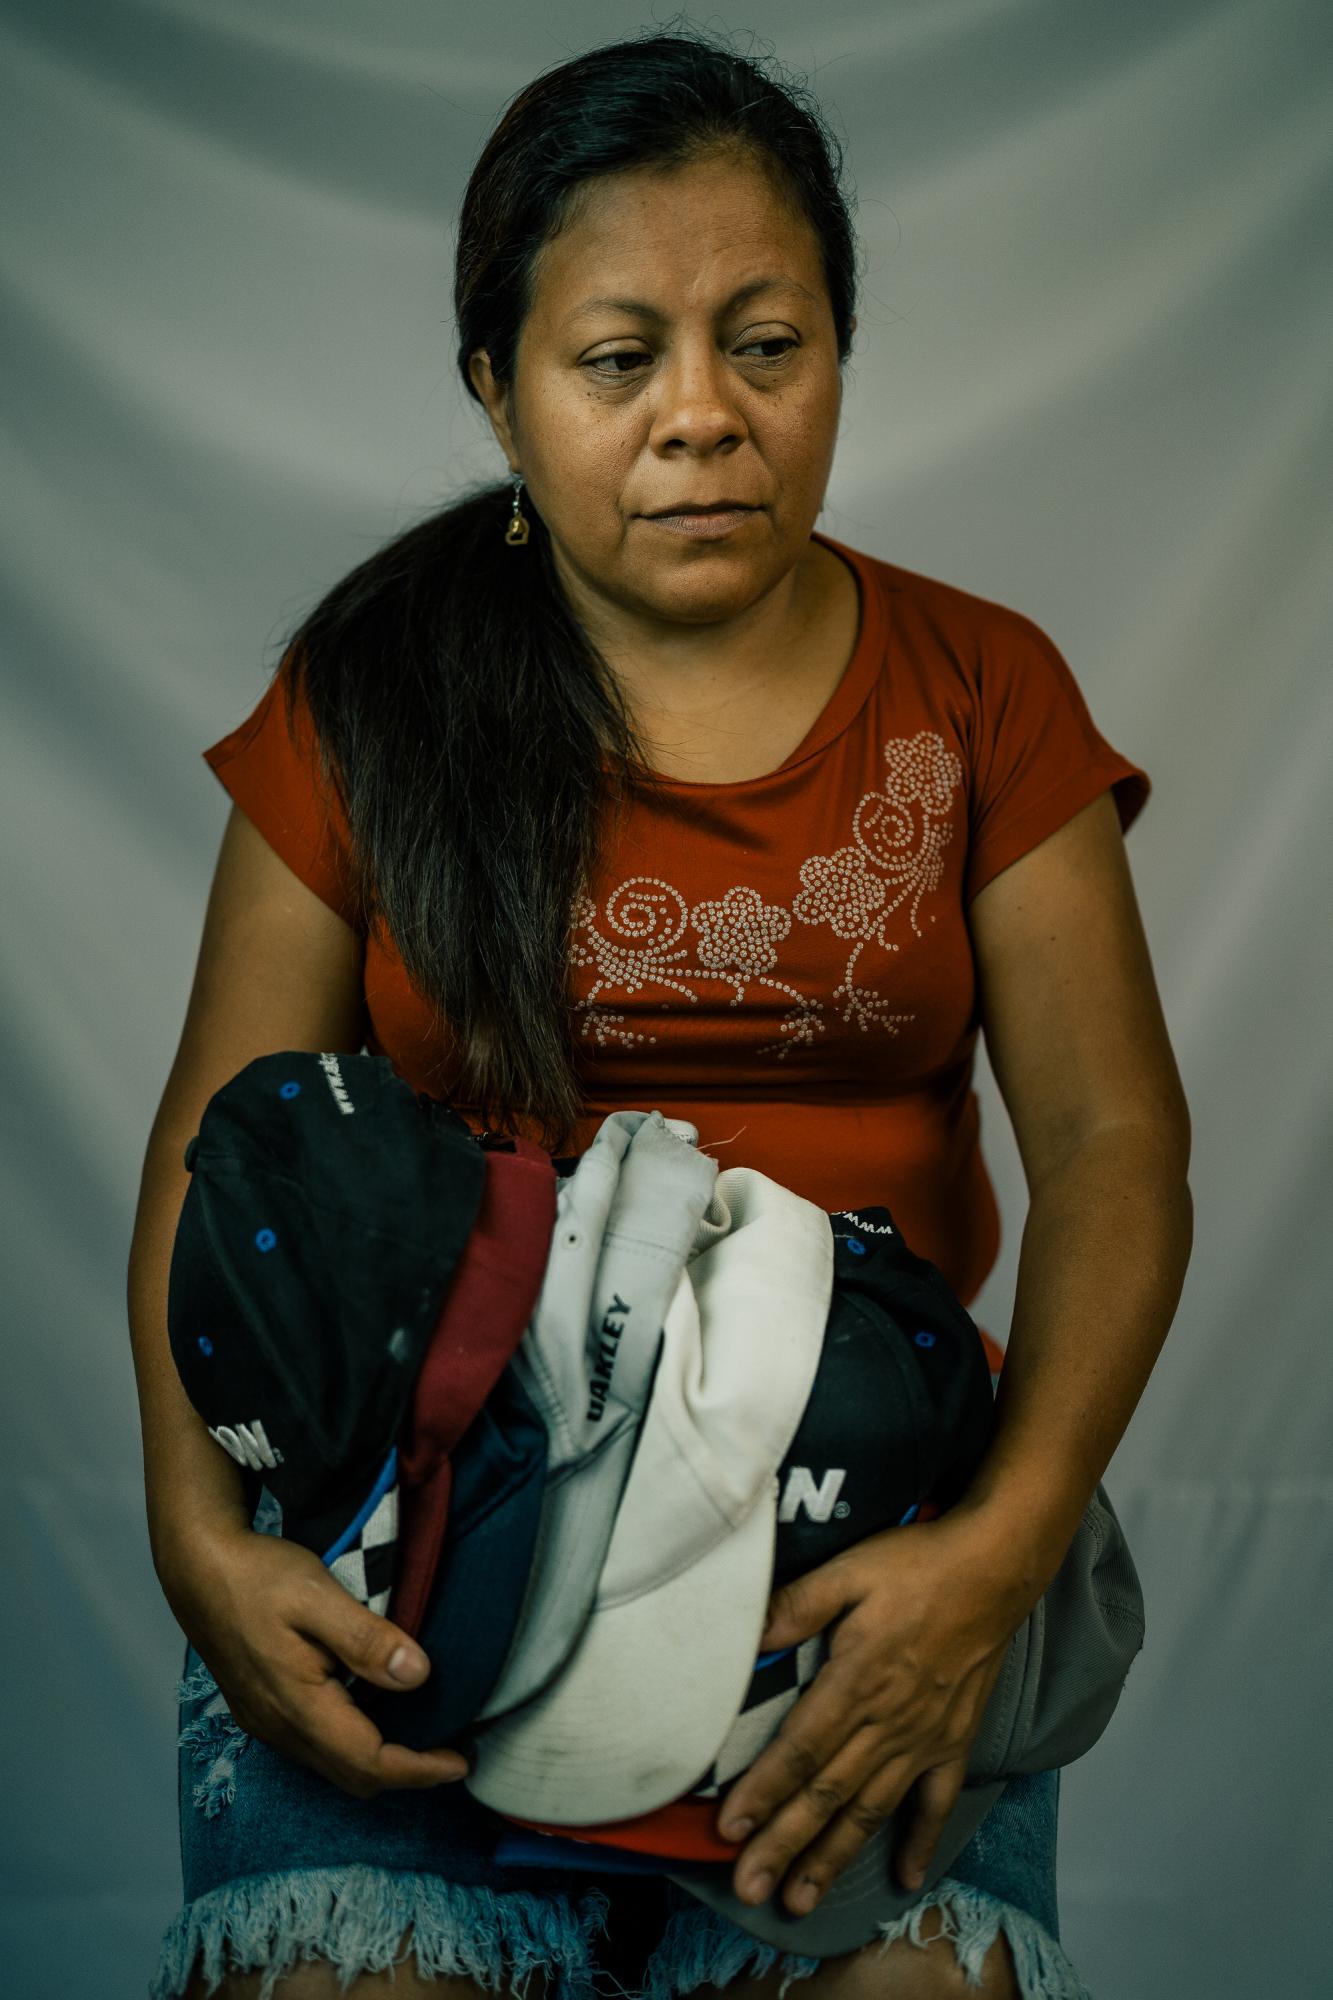 The Washington Post: Resistencia  - Maria poses with a collection of hats from her son, Michael, who was shot and killed by police...